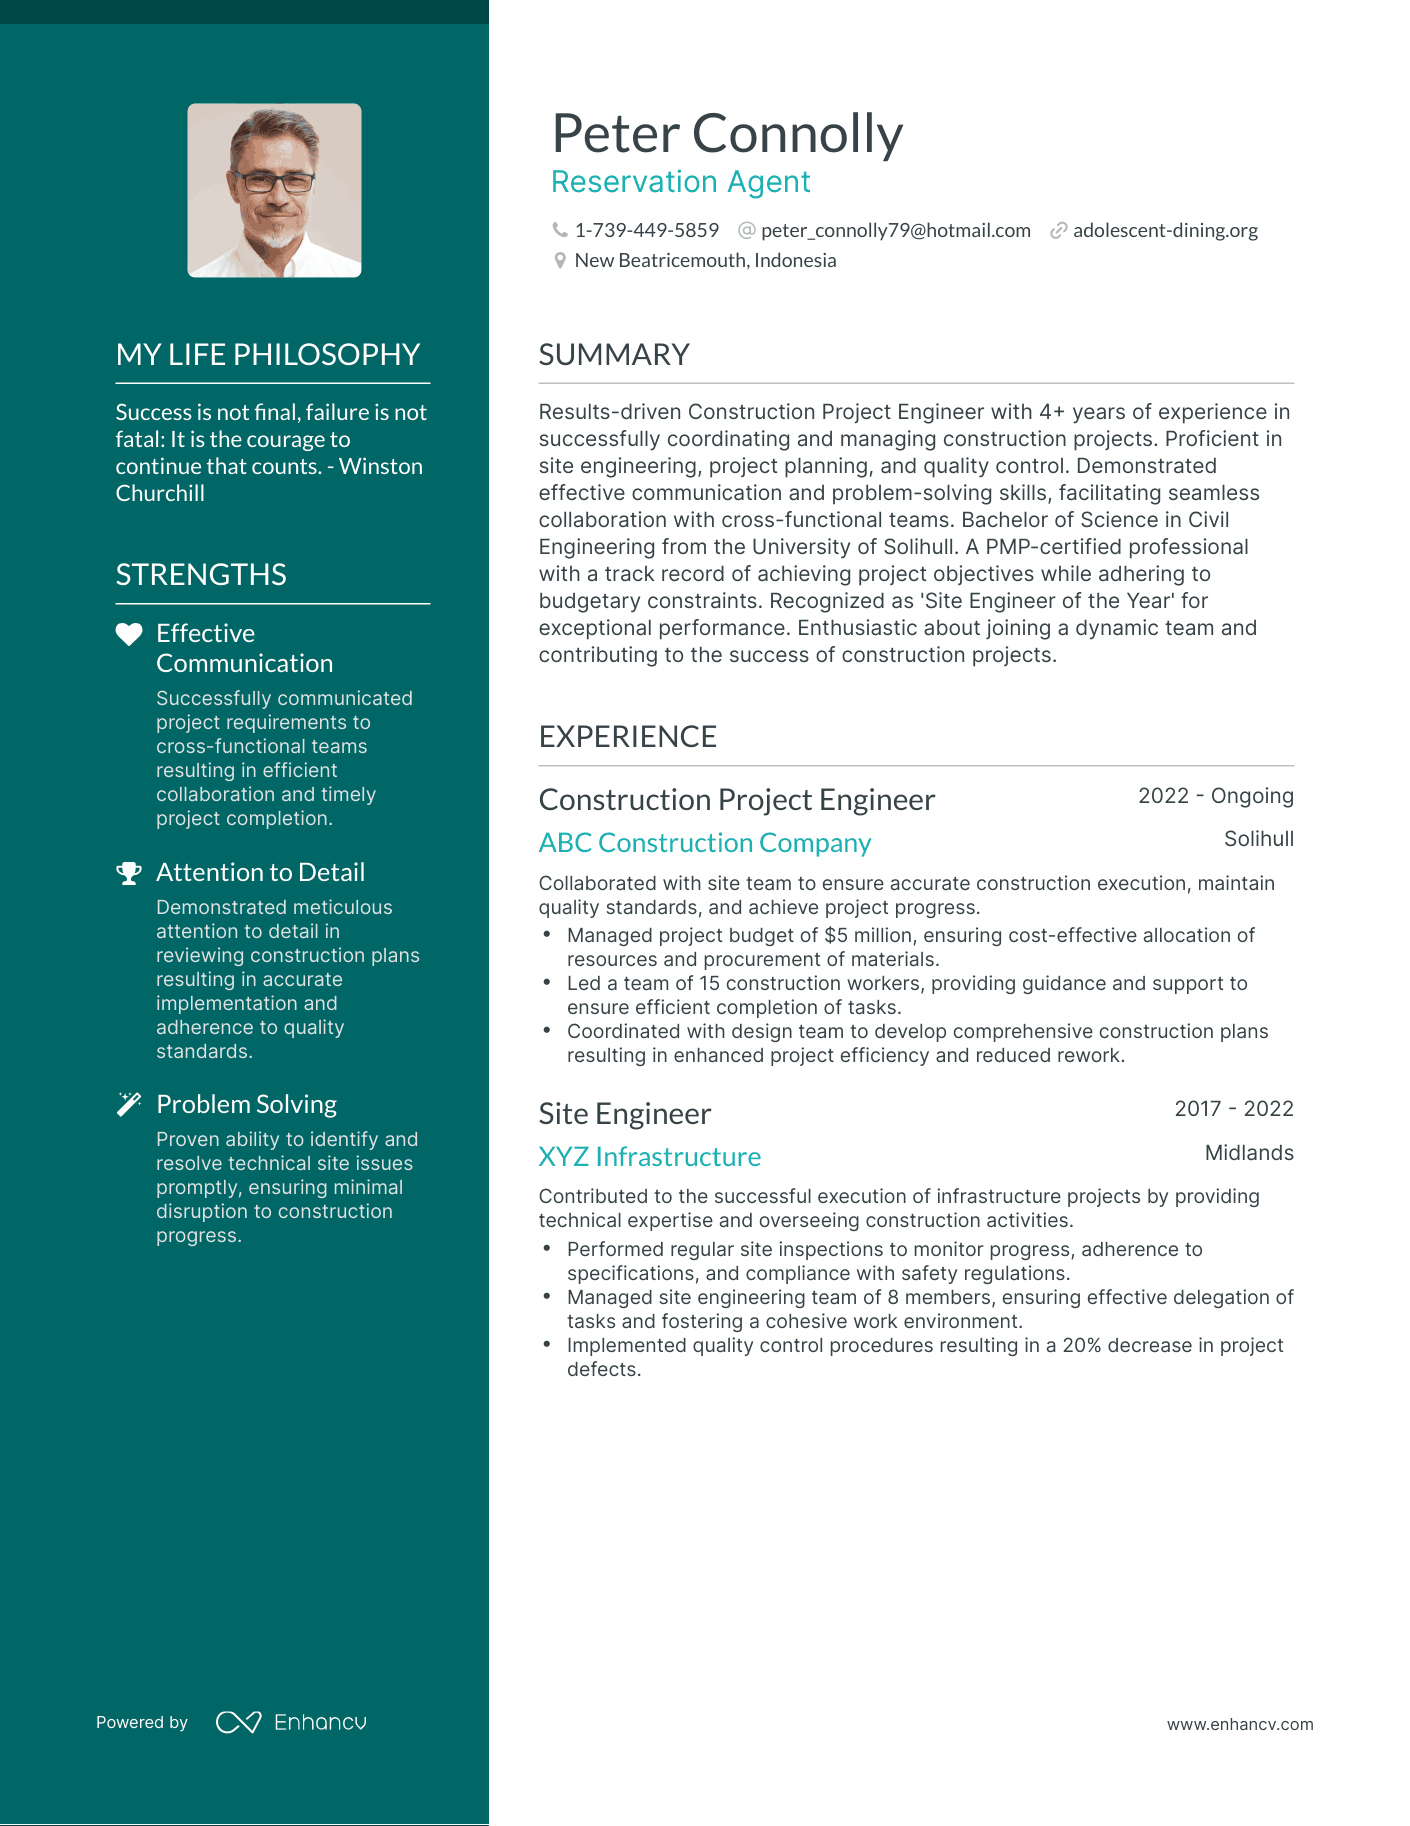 Creative Reservation Agent Resume Example